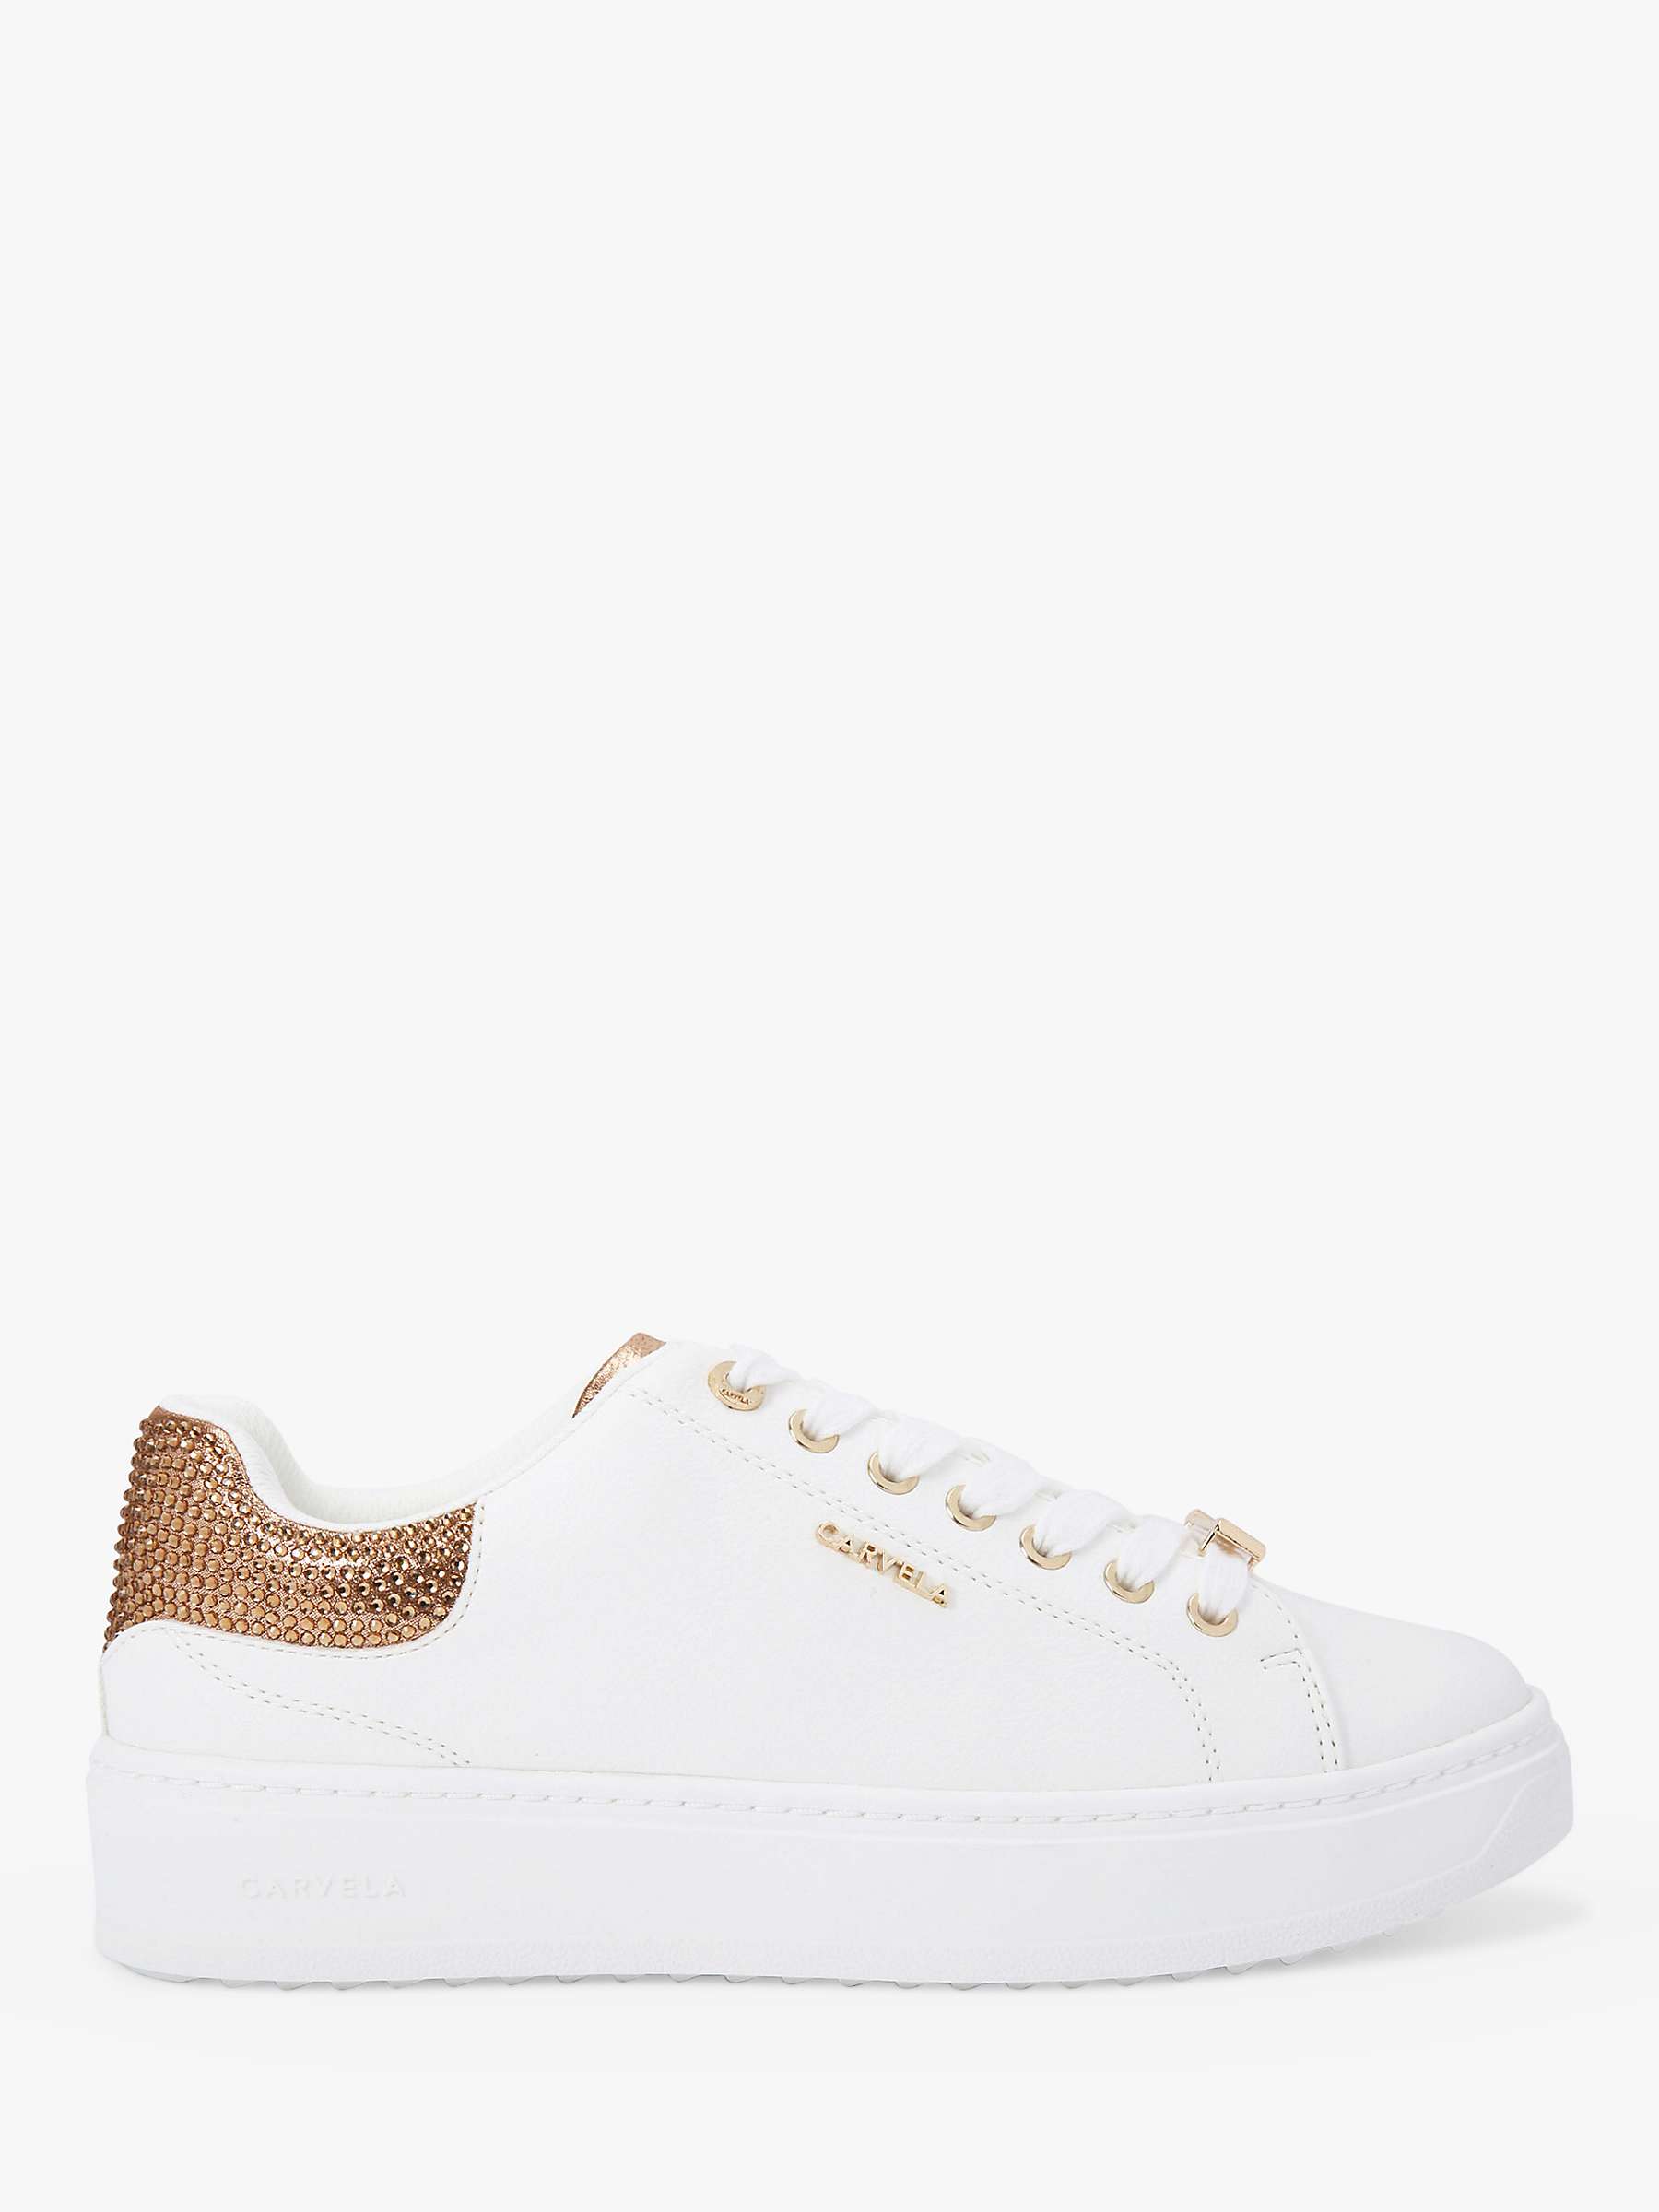 Buy Carvela Dream Lace Up Trainers Online at johnlewis.com